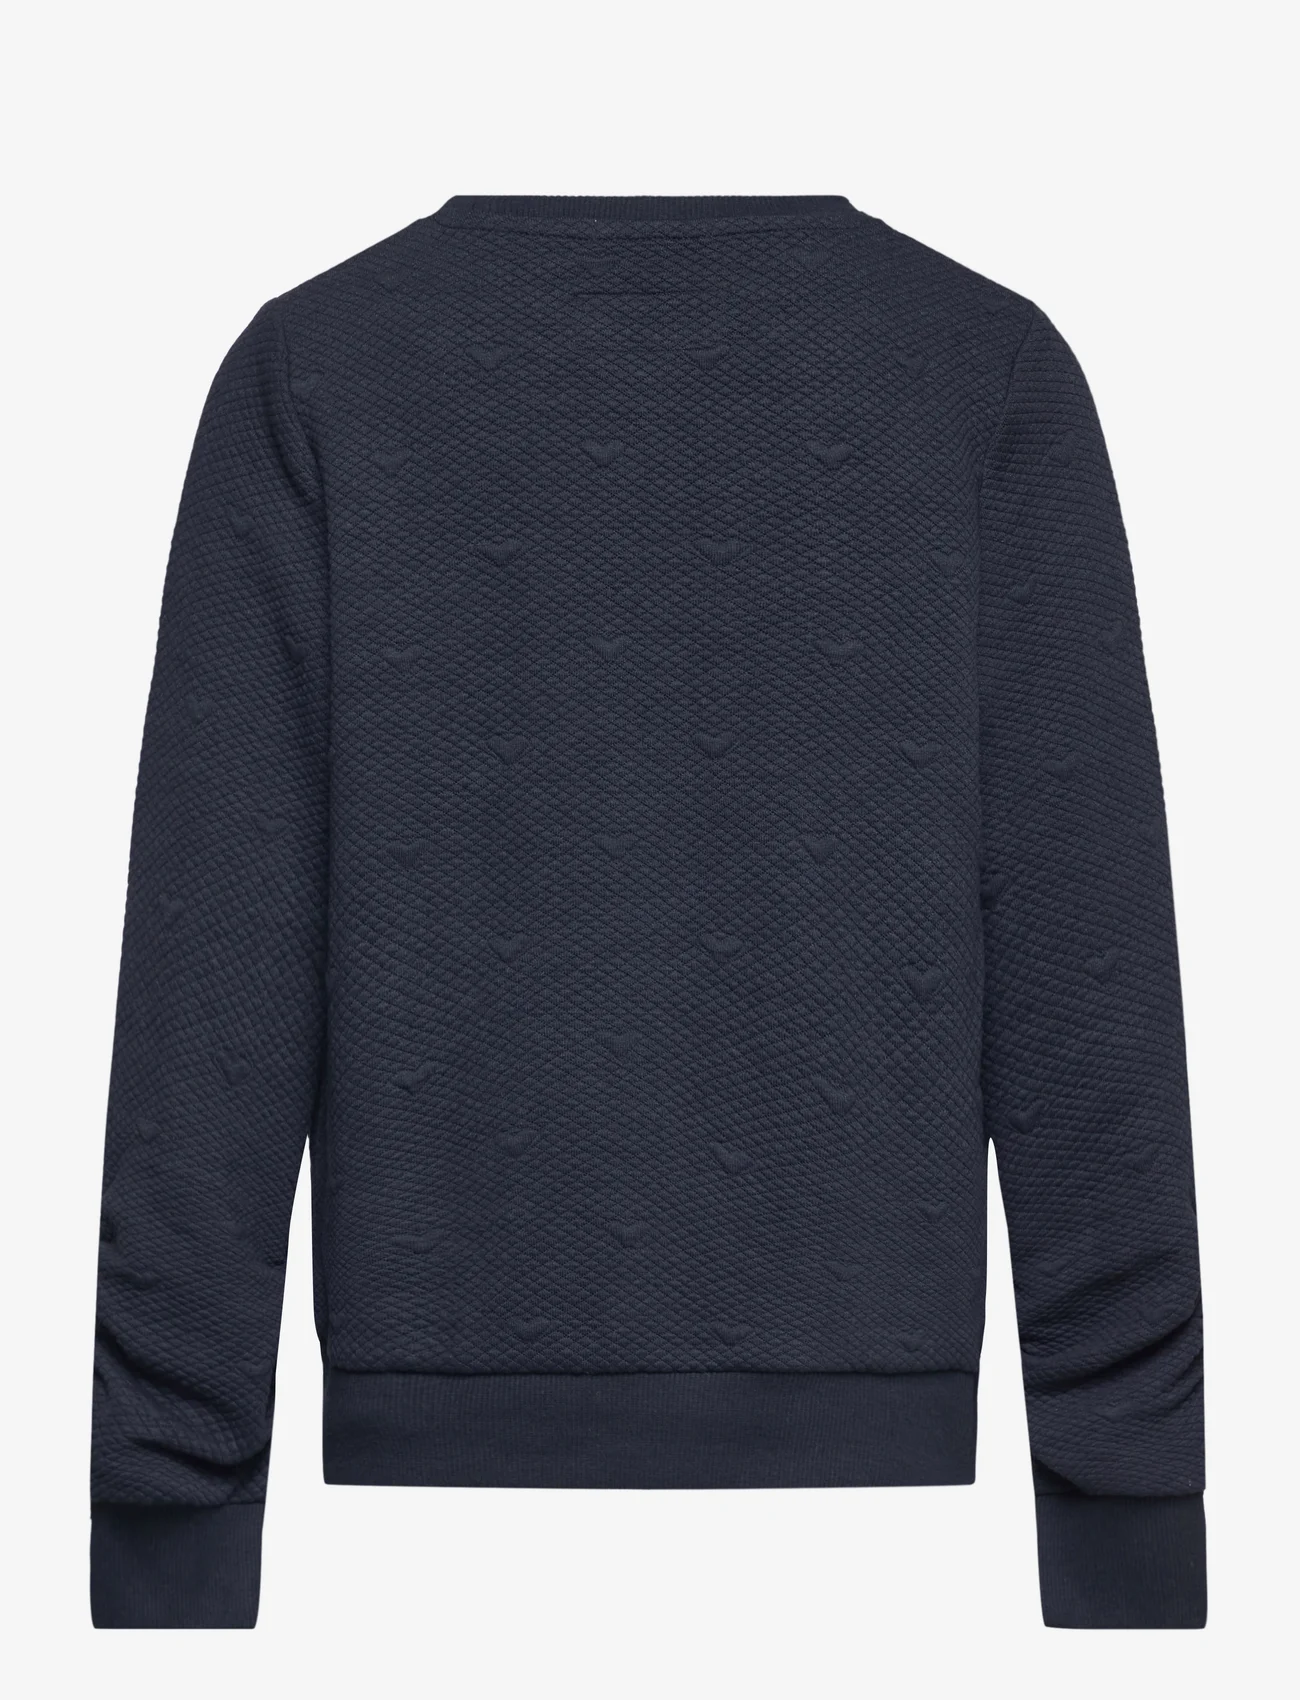 Tom Tailor - structured jaquard sweater - sweatshirts - sky captain blue - 1